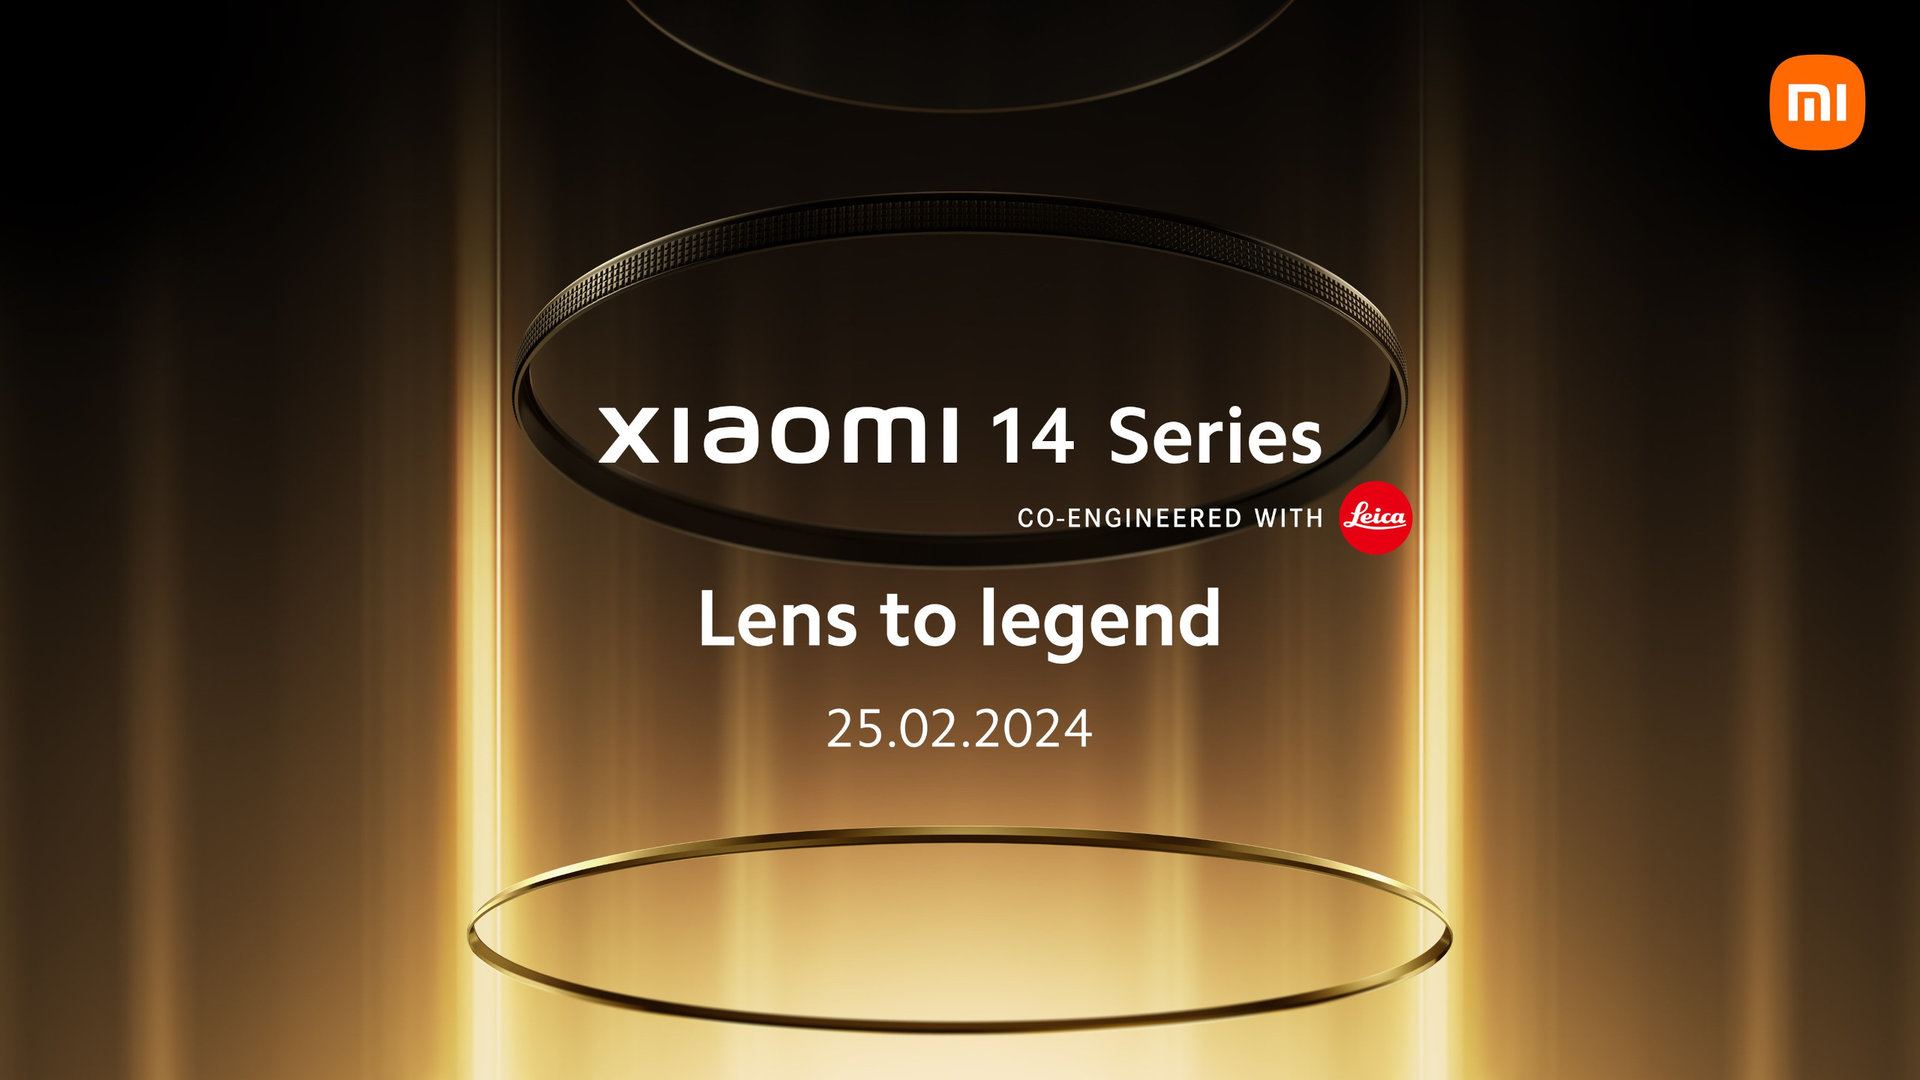 Xiaomi 14 series global launch event image